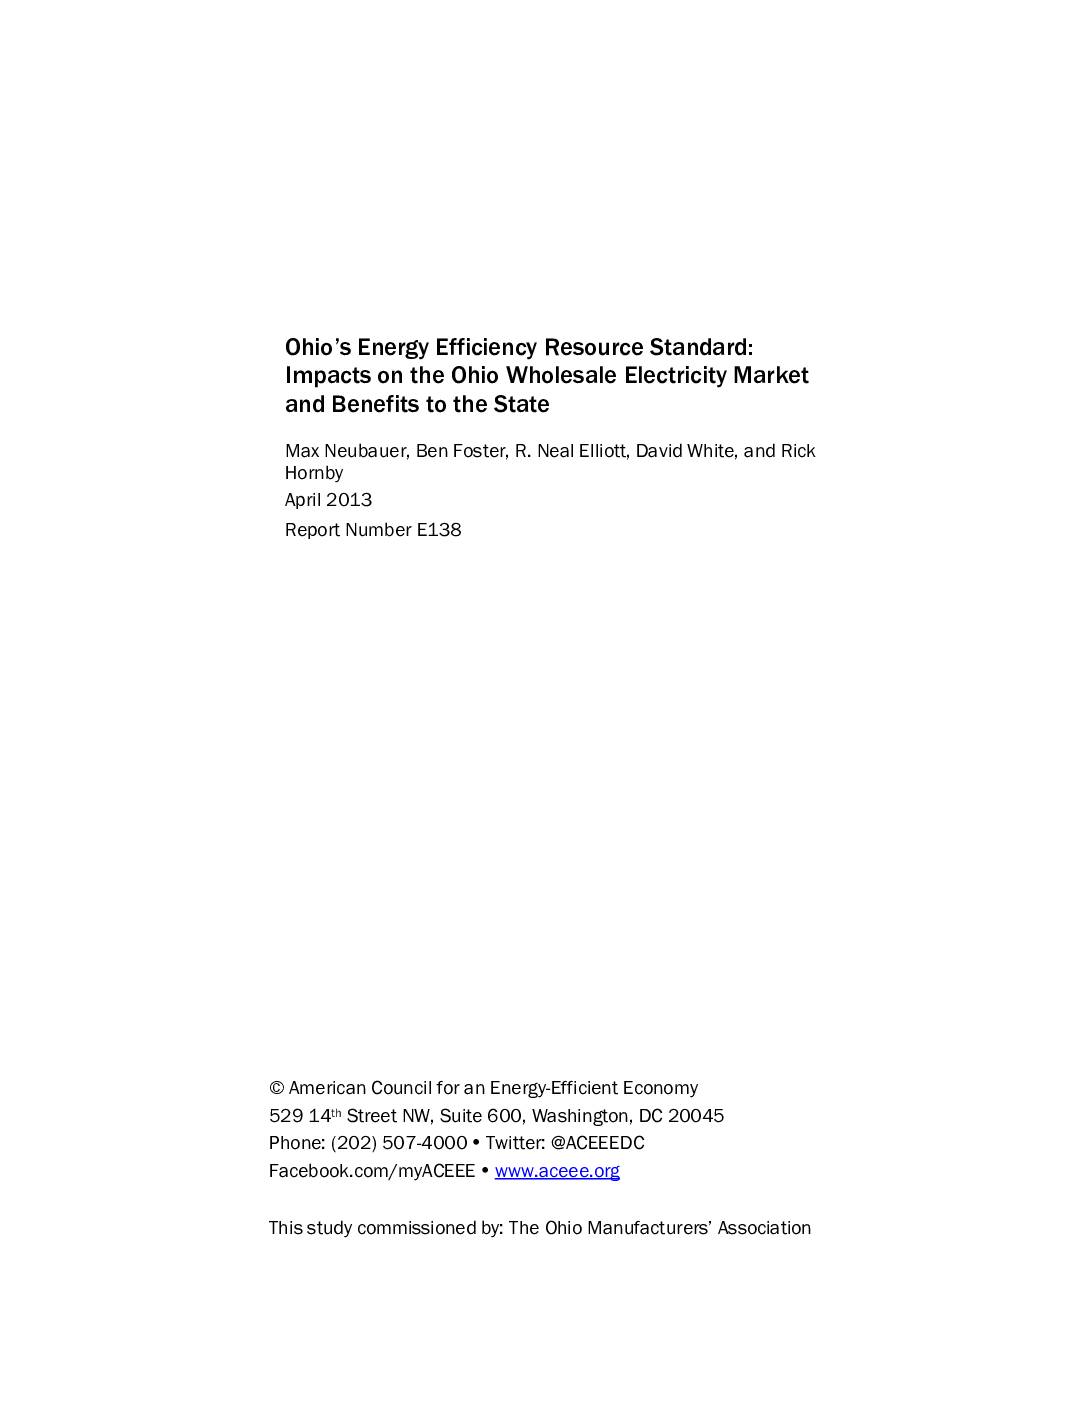 Ohio’s Energy Efficiency Resource Standard: Impacts on the Ohio Wholesale Electricity Market and Benefits to the State